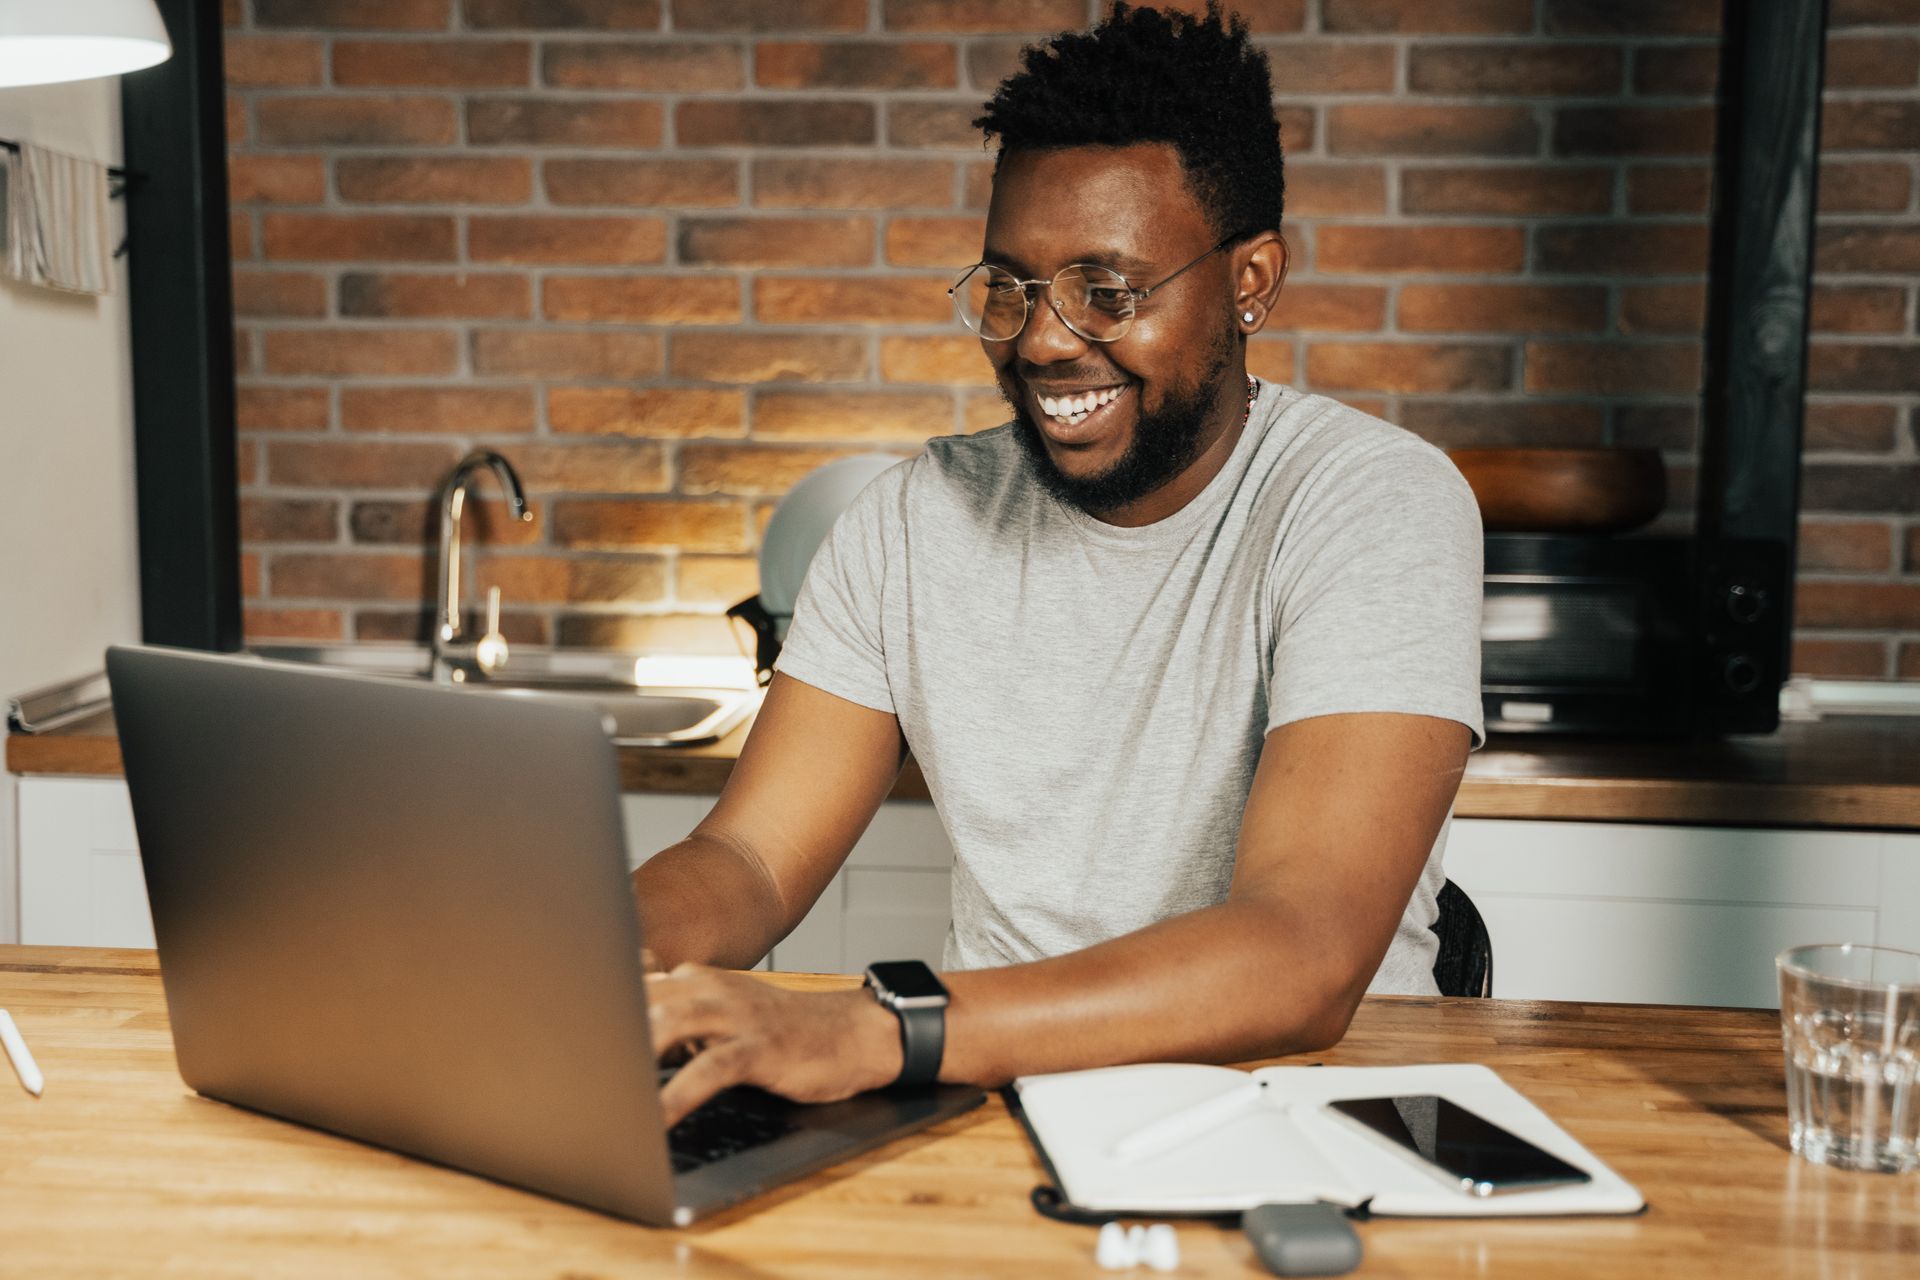 Image of a man using a laptop